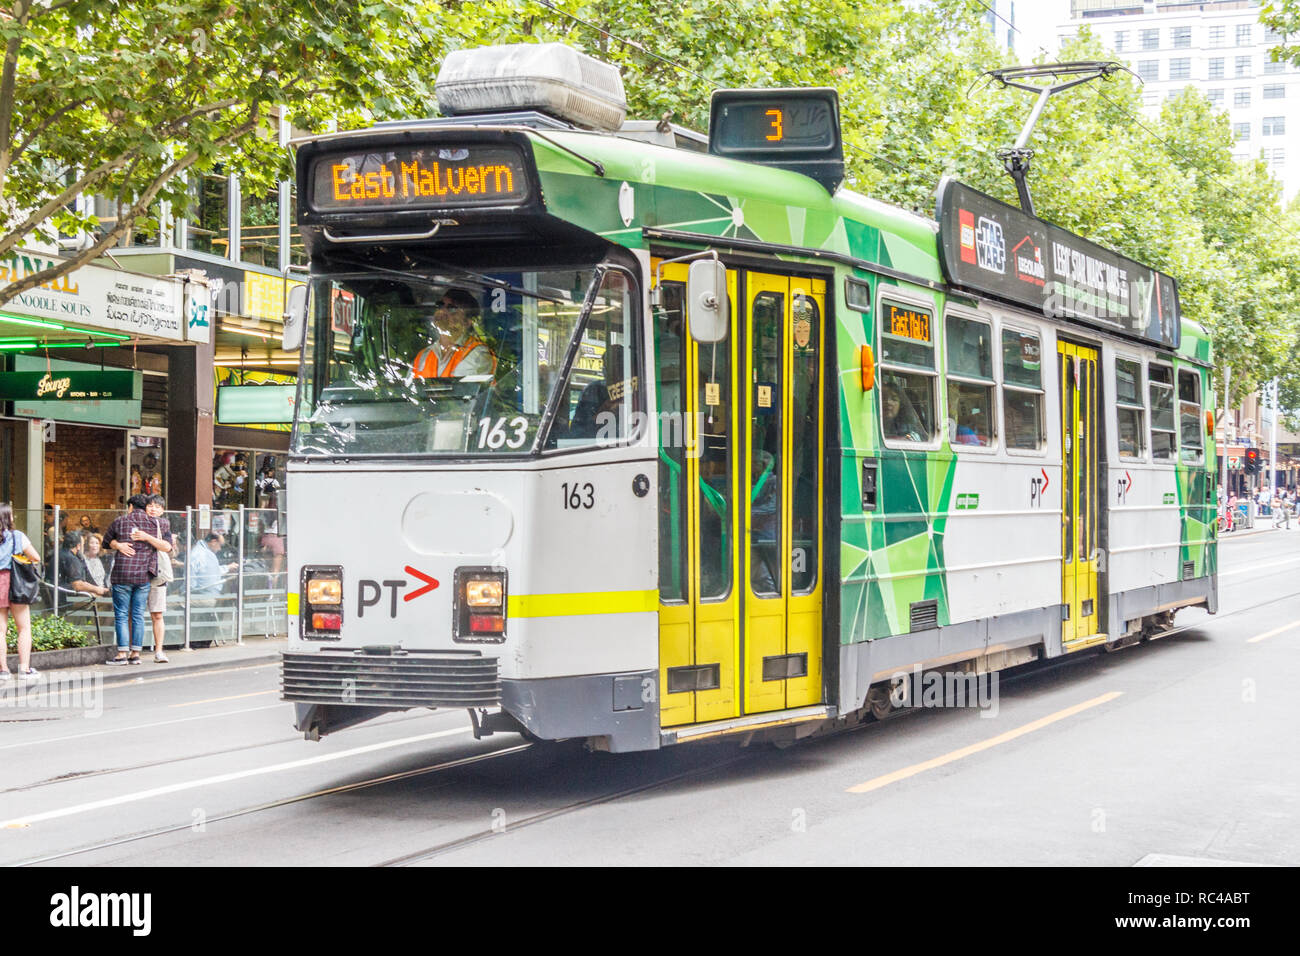 Melbourne, Australia - 21st February 2018: A modern electric tram. The city centre has a good network of trams. Stock Photo